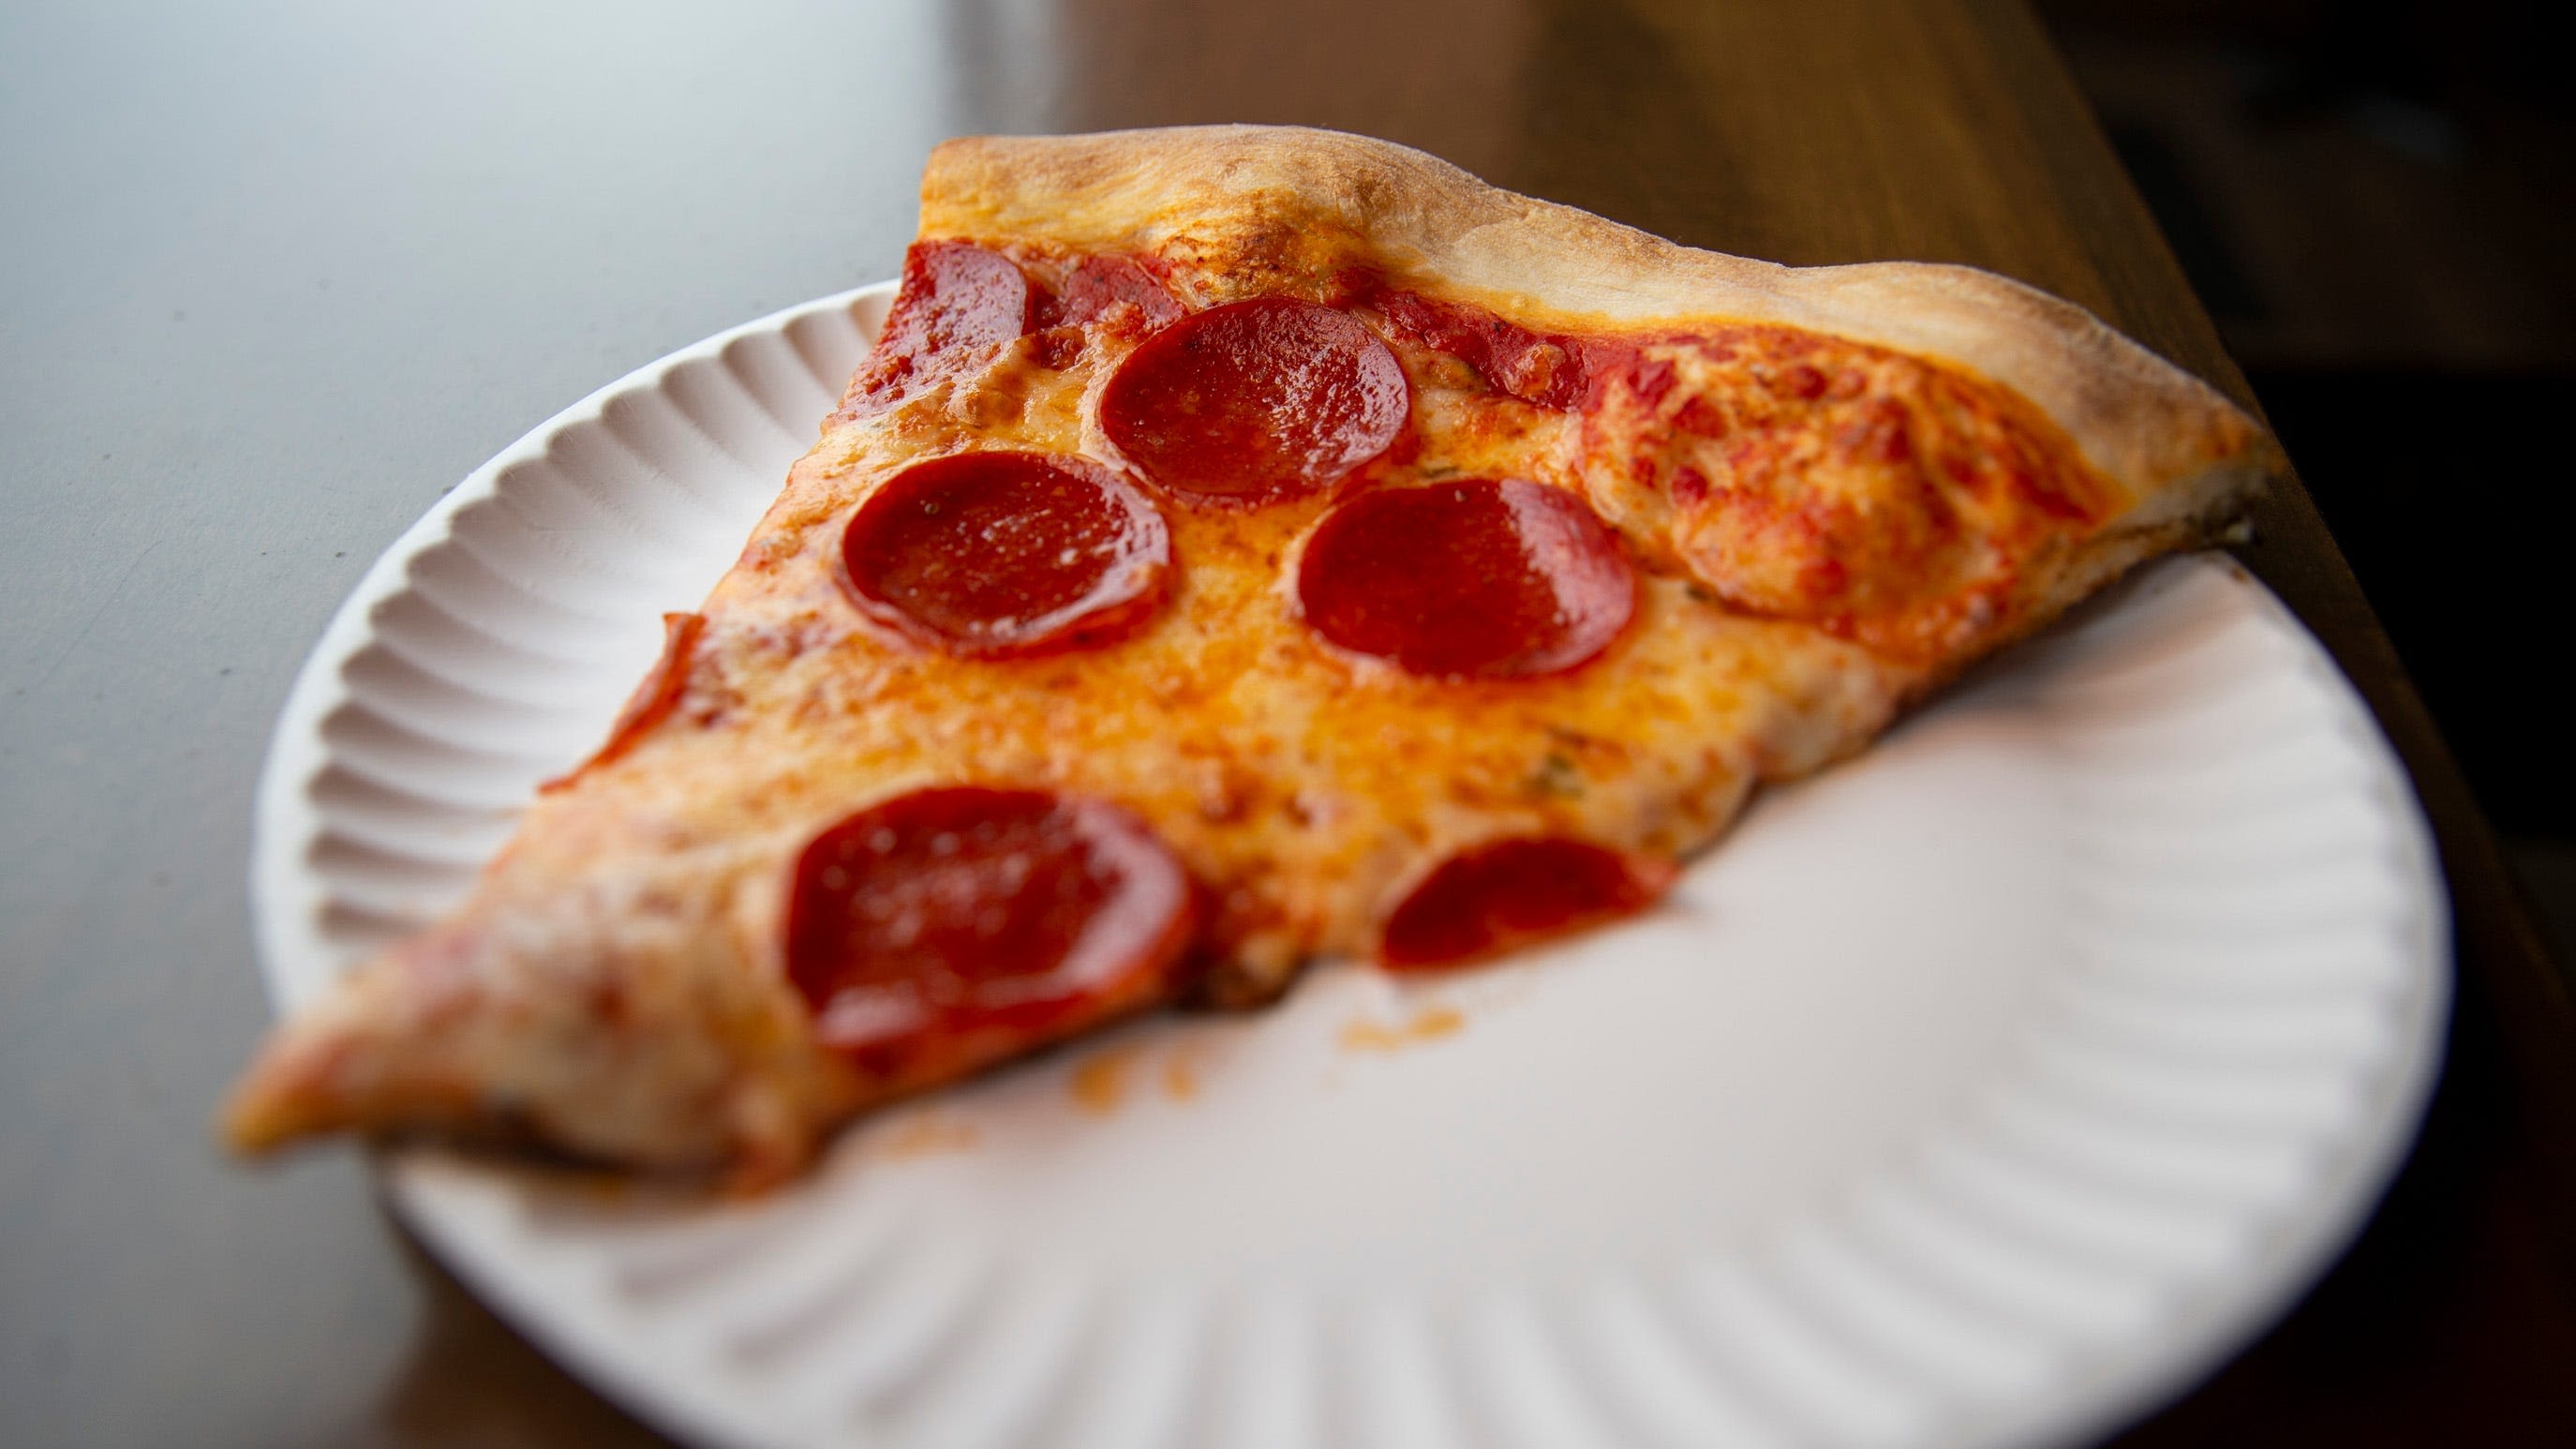 Walmart is opening pizza restaurants in four states. Here's what you need to know.